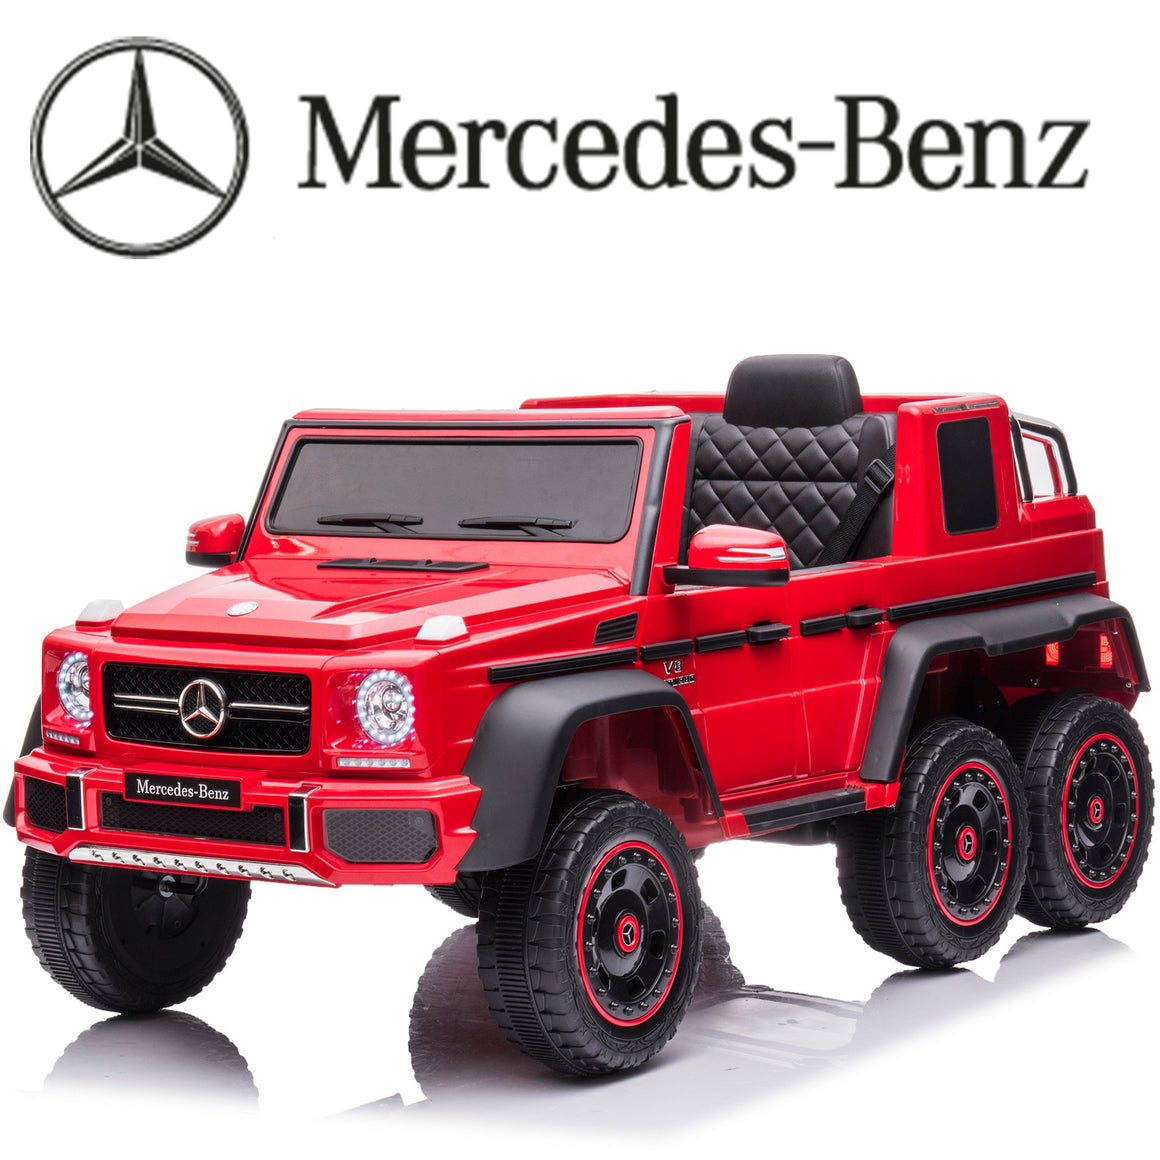 uhomepro 24V Powered Ride On Cars, Licensed Mercedes Benz G63 Car Vehicles with Remote Control, MP3 Player, Soft Seat, 6 Wheels Drive, Kids Ride On Toys for Boys Girls, Black